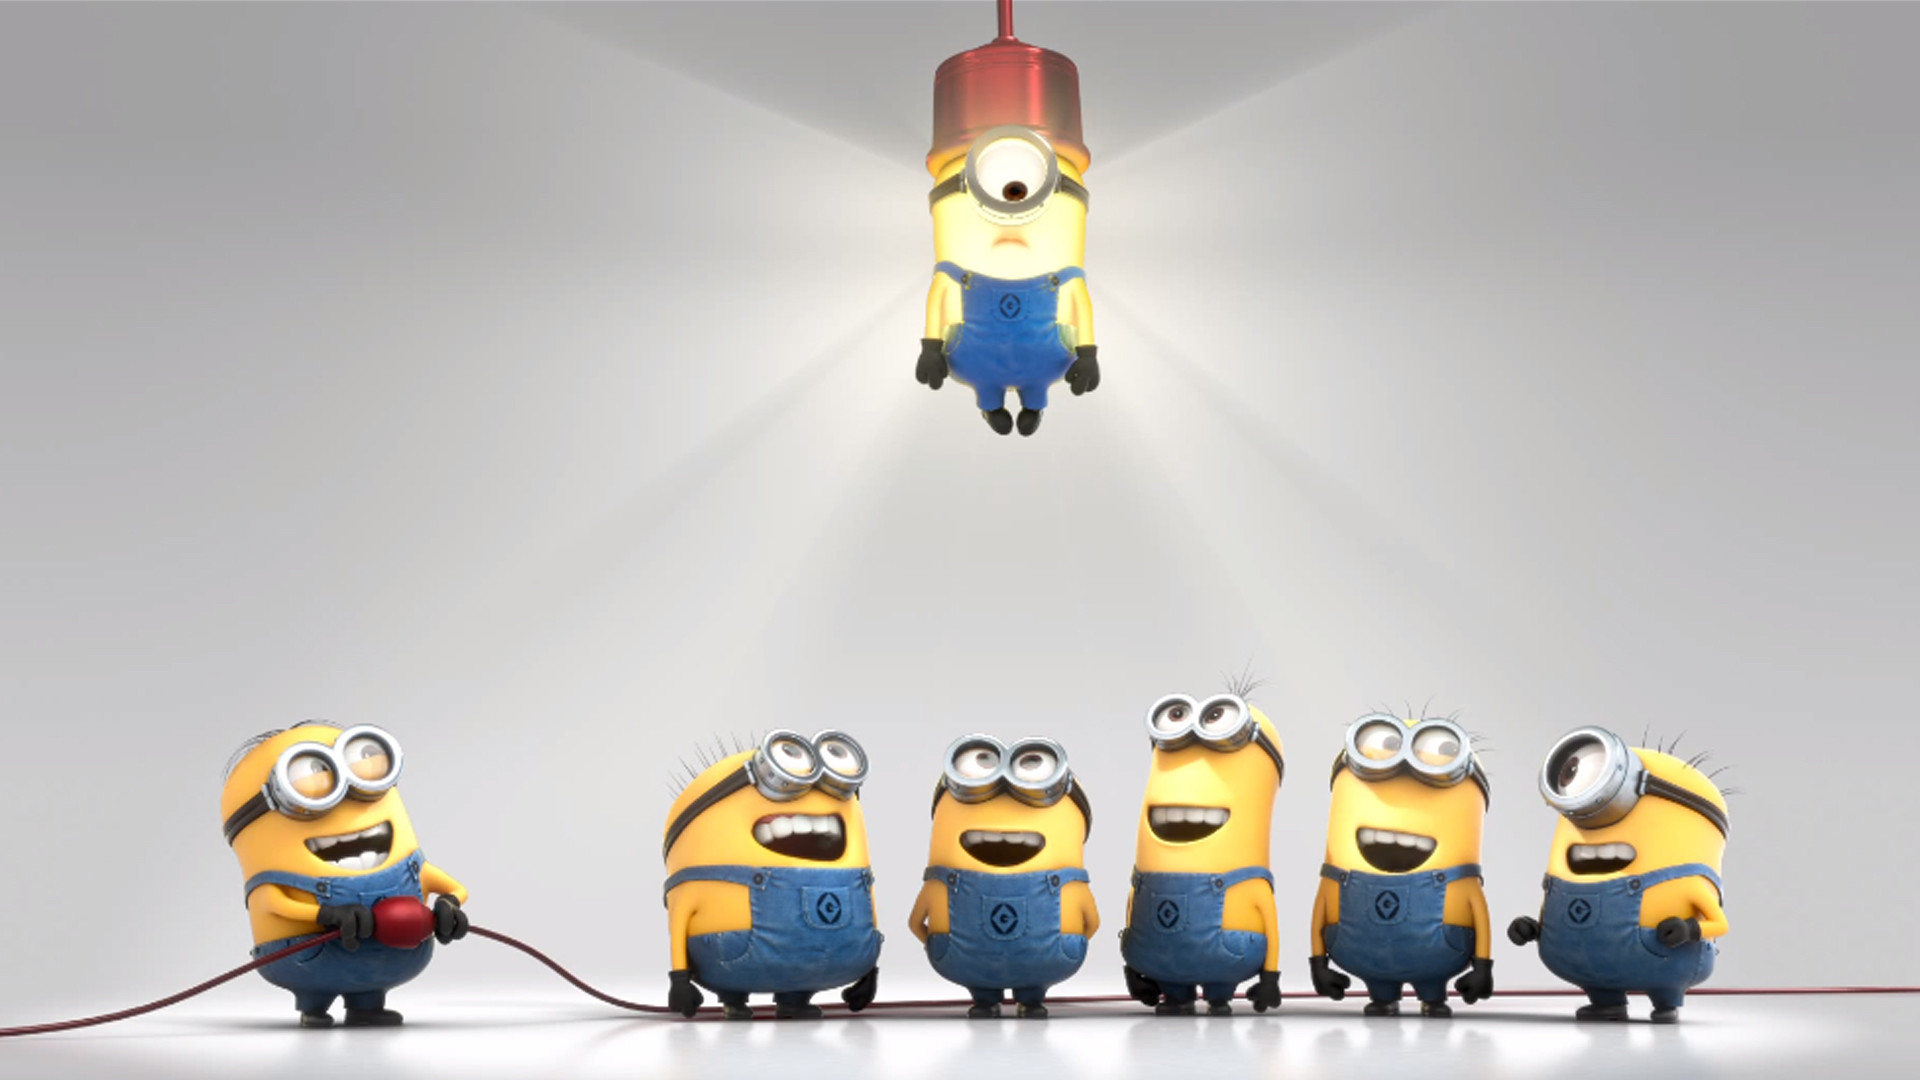 1920x1080 Search Results for “minions animated wallpaper” – Adorable Wallpapers